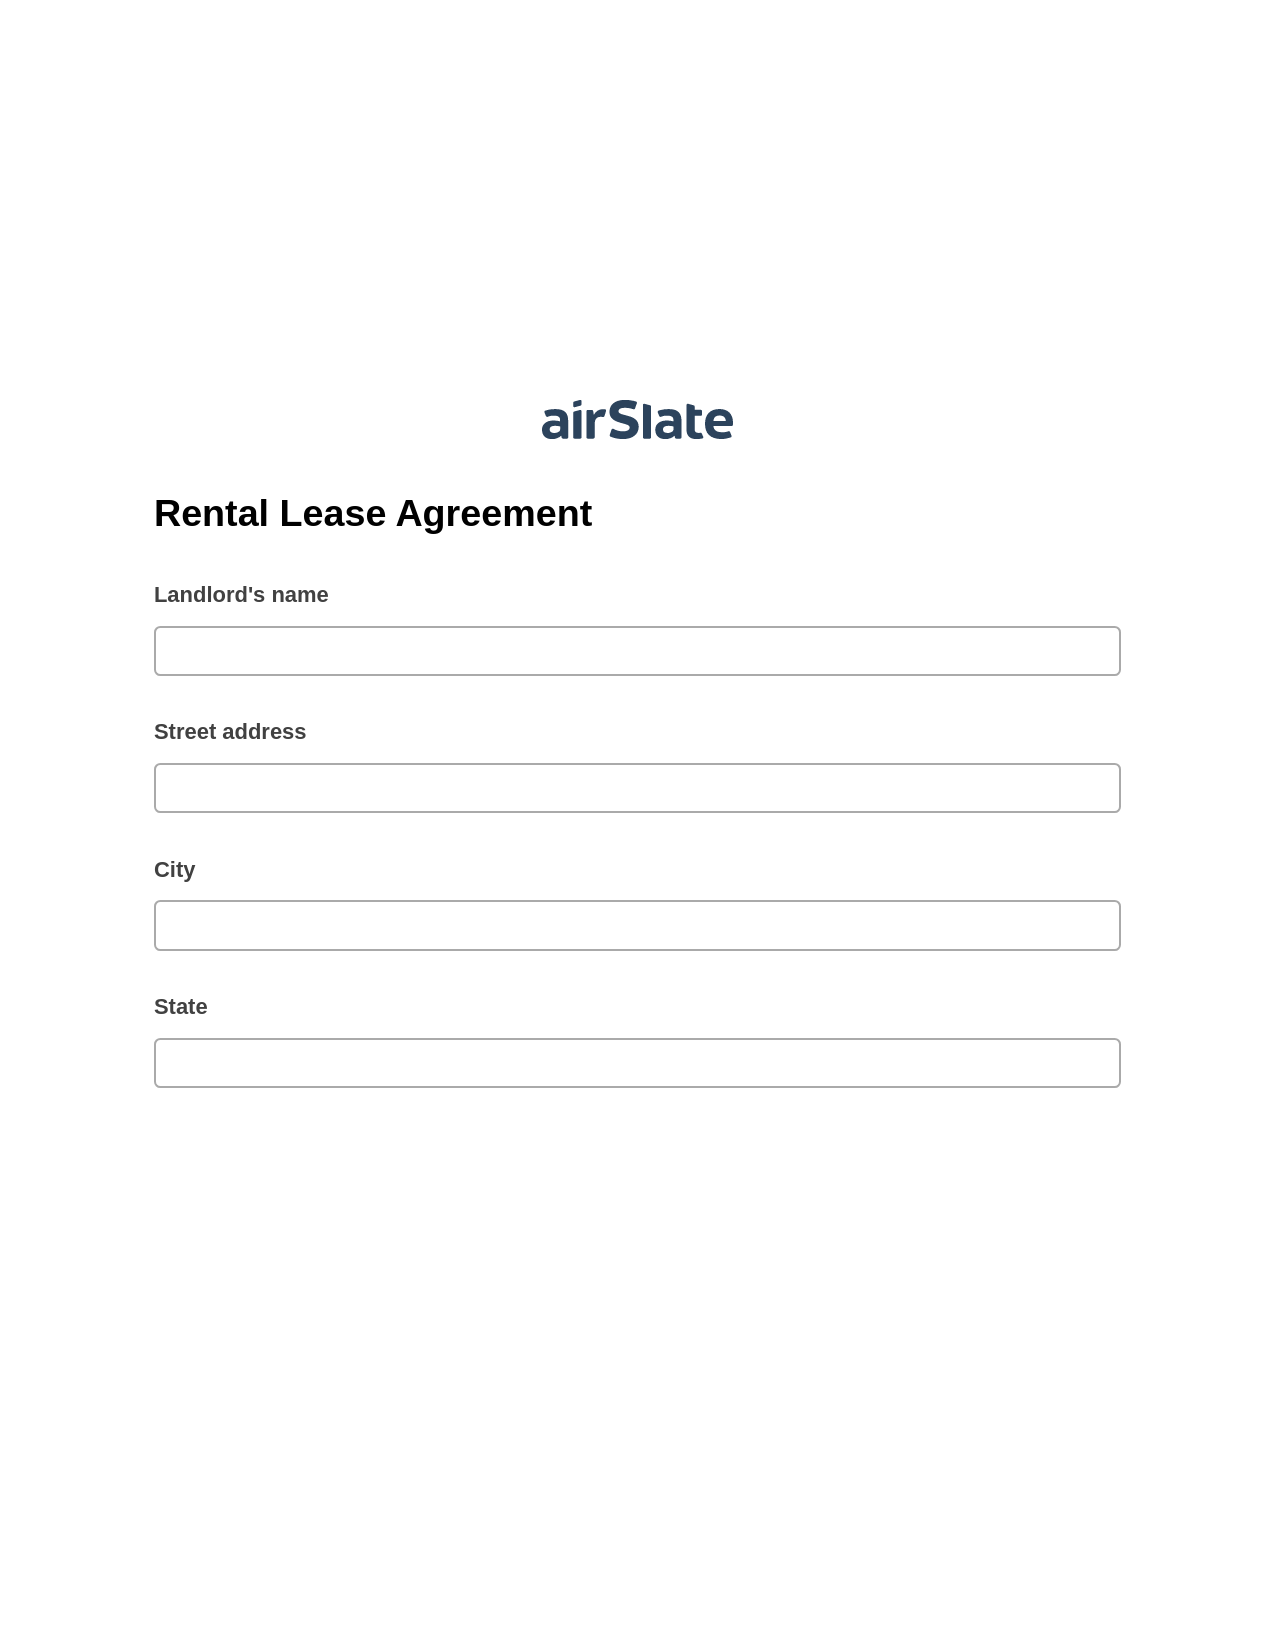 Multirole Rental Lease Agreement Pre-fill from CSV File Dropdown Options Bot, Create NetSuite Records Bot, Export to Formstack Documents Bot